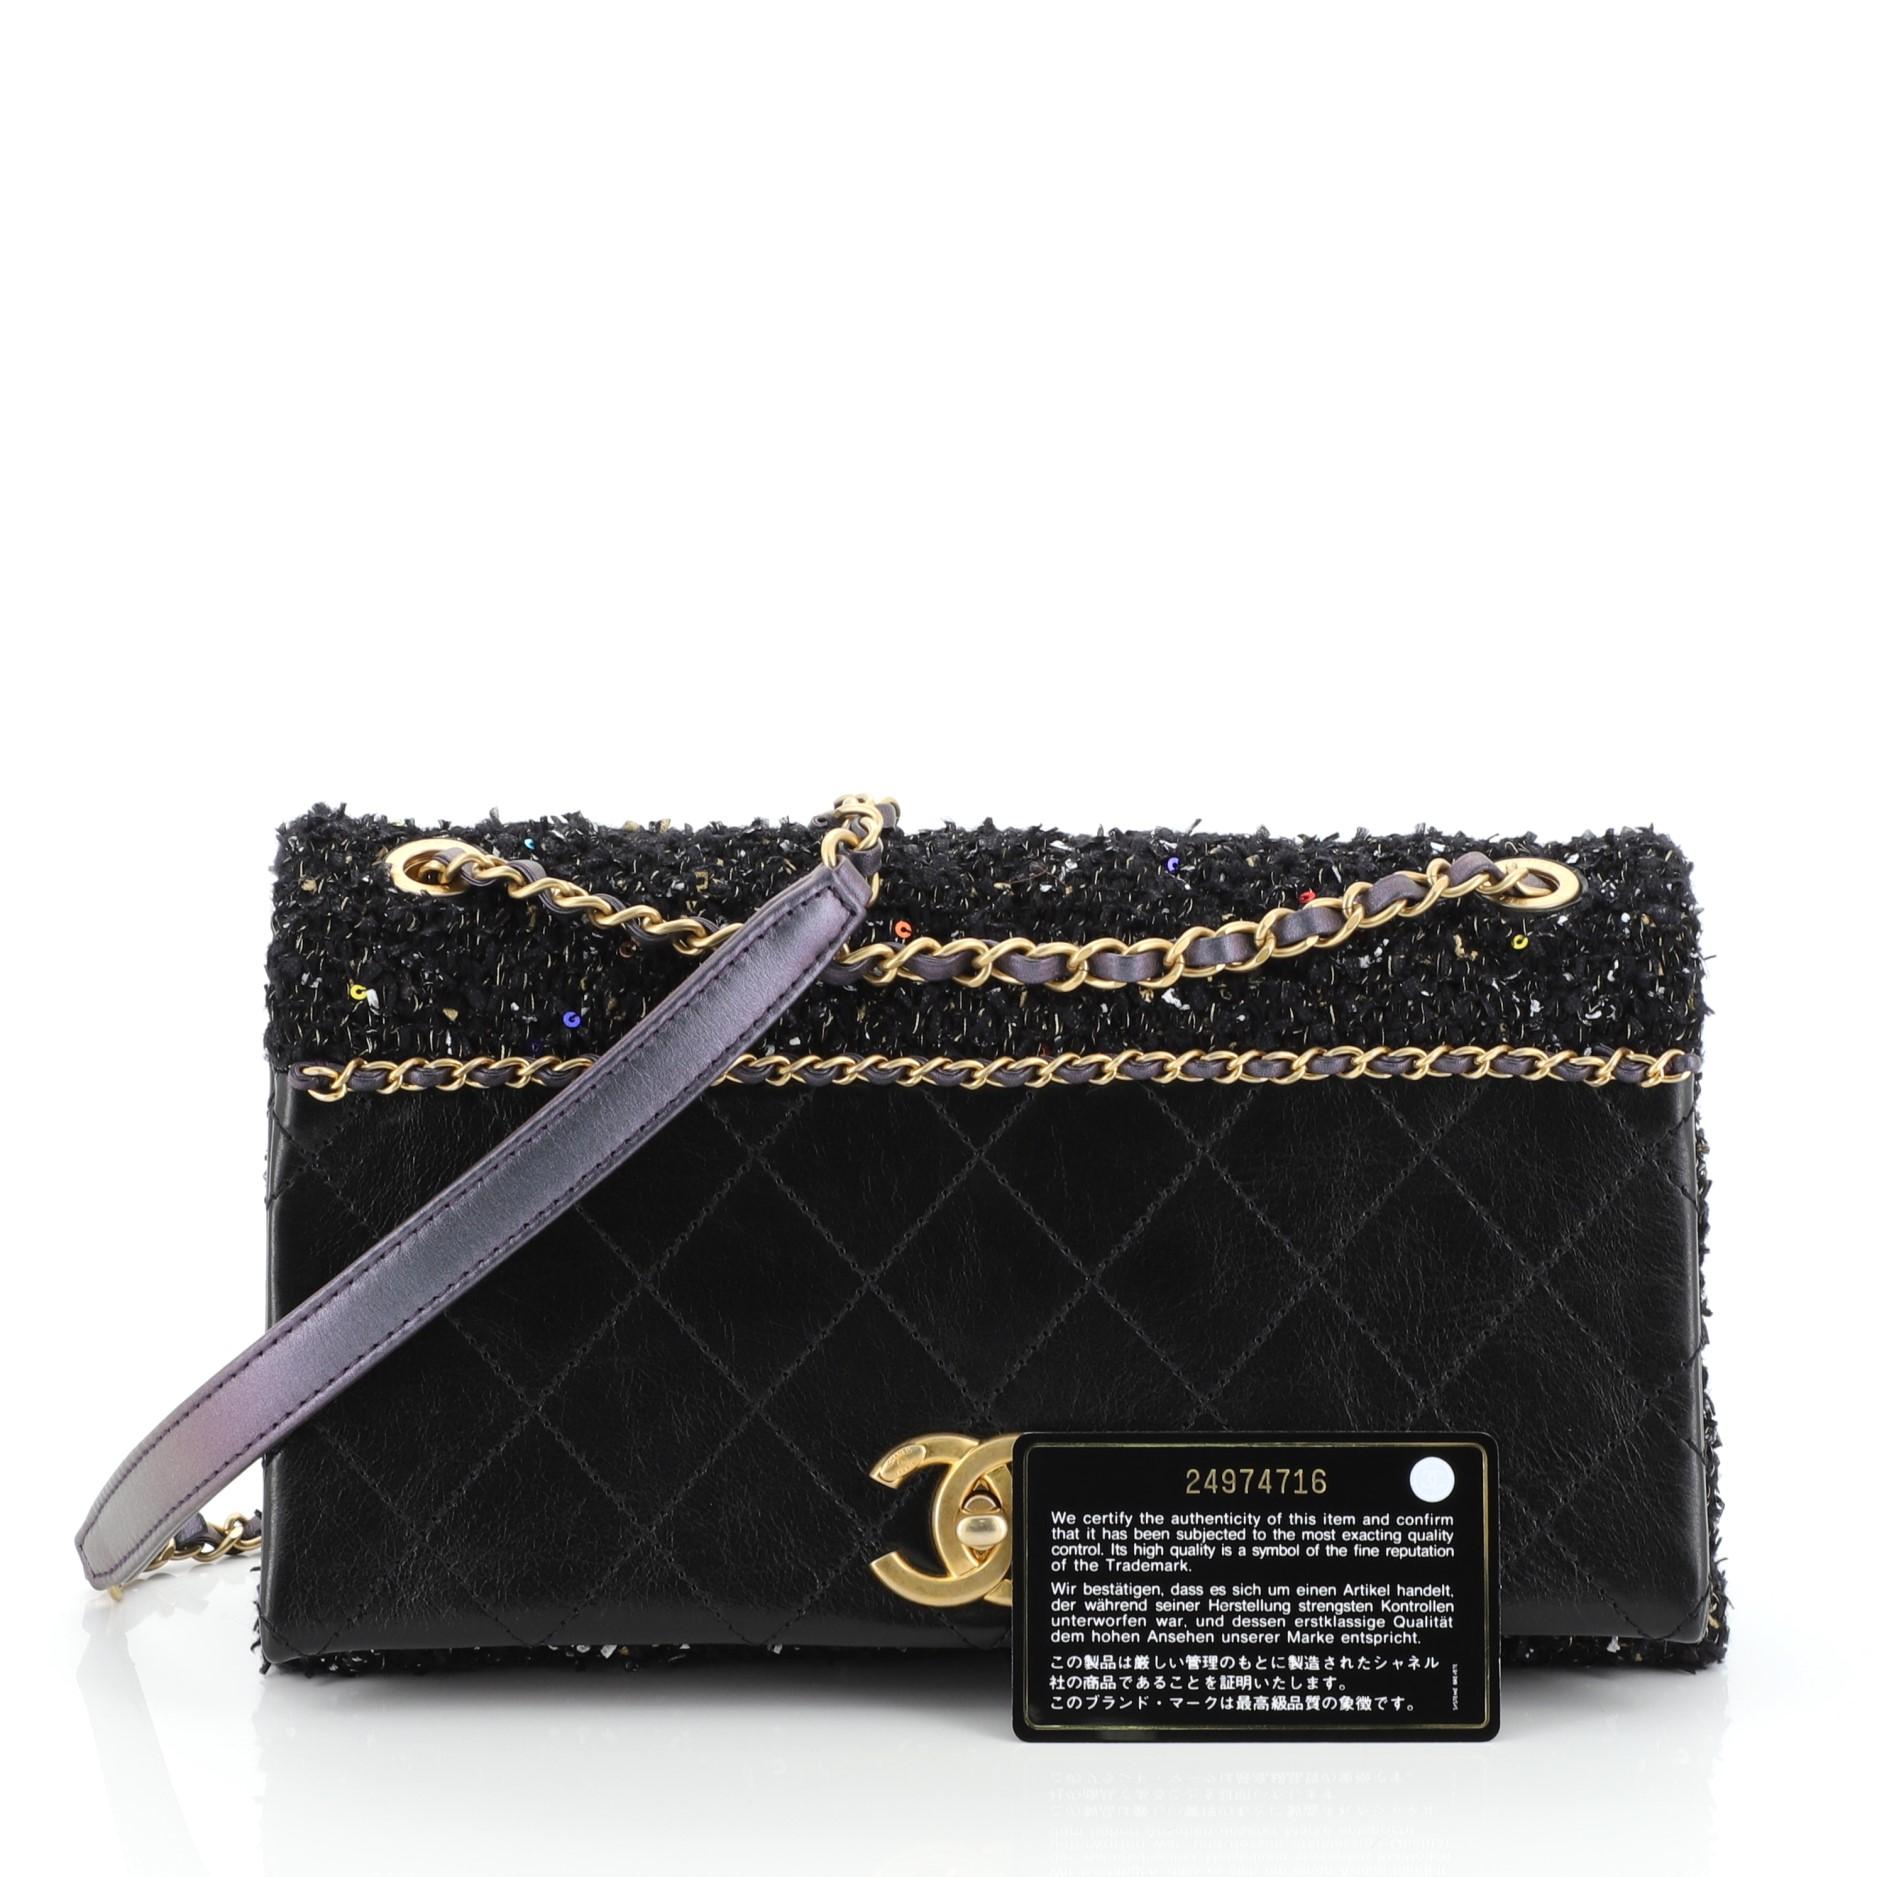 This Chanel CC Chain Flap Bag Quilted Embellished Tweed and Quilted Calfskin Small, crafted from black tweed and quilted calfskin leather, features woven-in leather chain strap and gold-tone hardware. Its CC turn-lock closure opens to a pink fabric